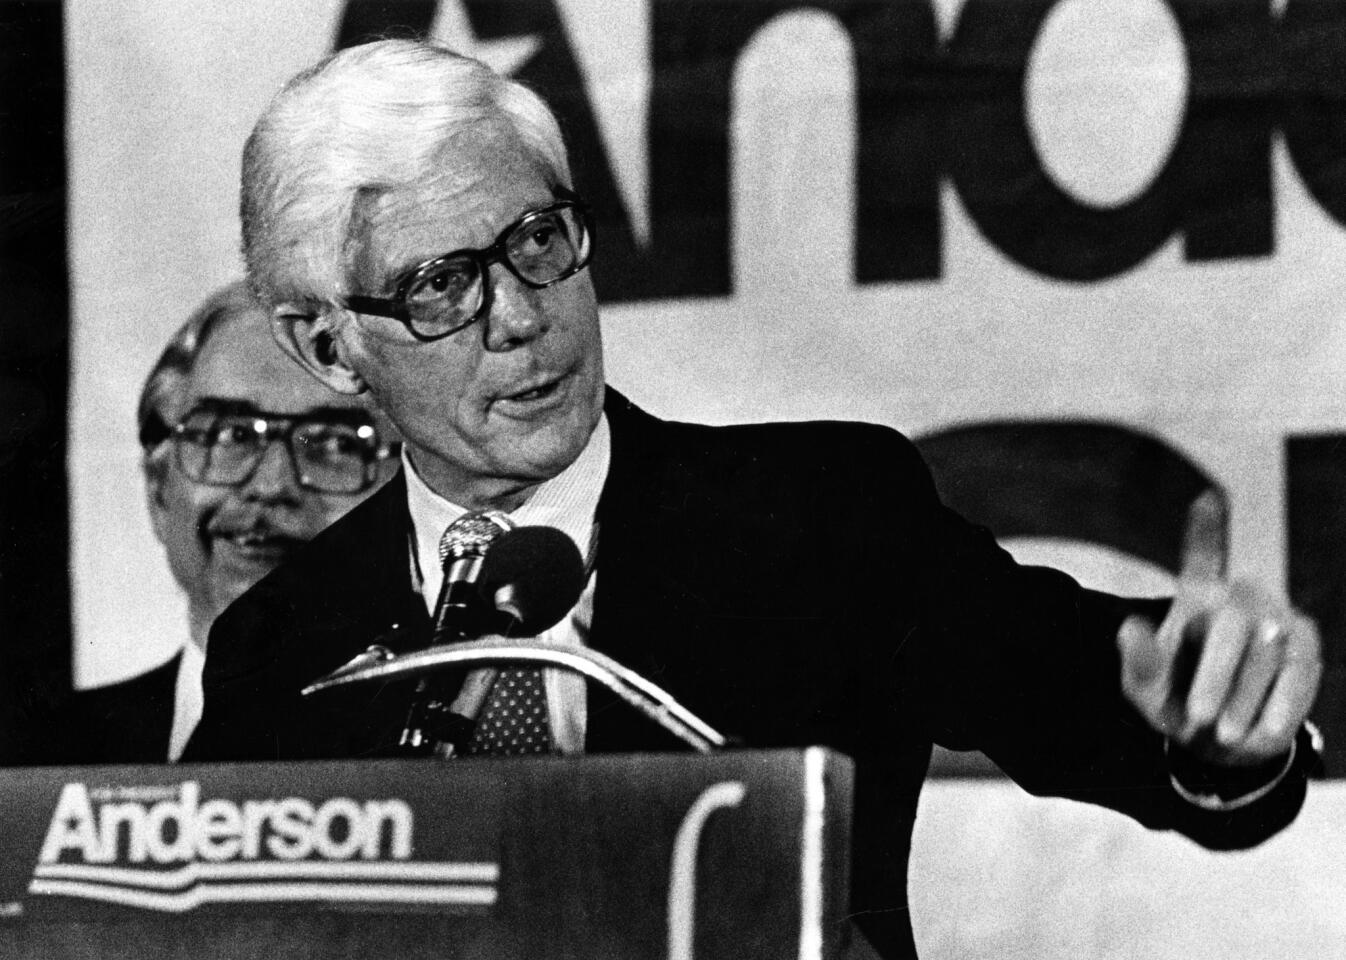 John B. Anderson holds a news conference at the Bismark Hotel in Chicago before walking down to the Daley Center and holding a rally on Sept. 23, 1980.